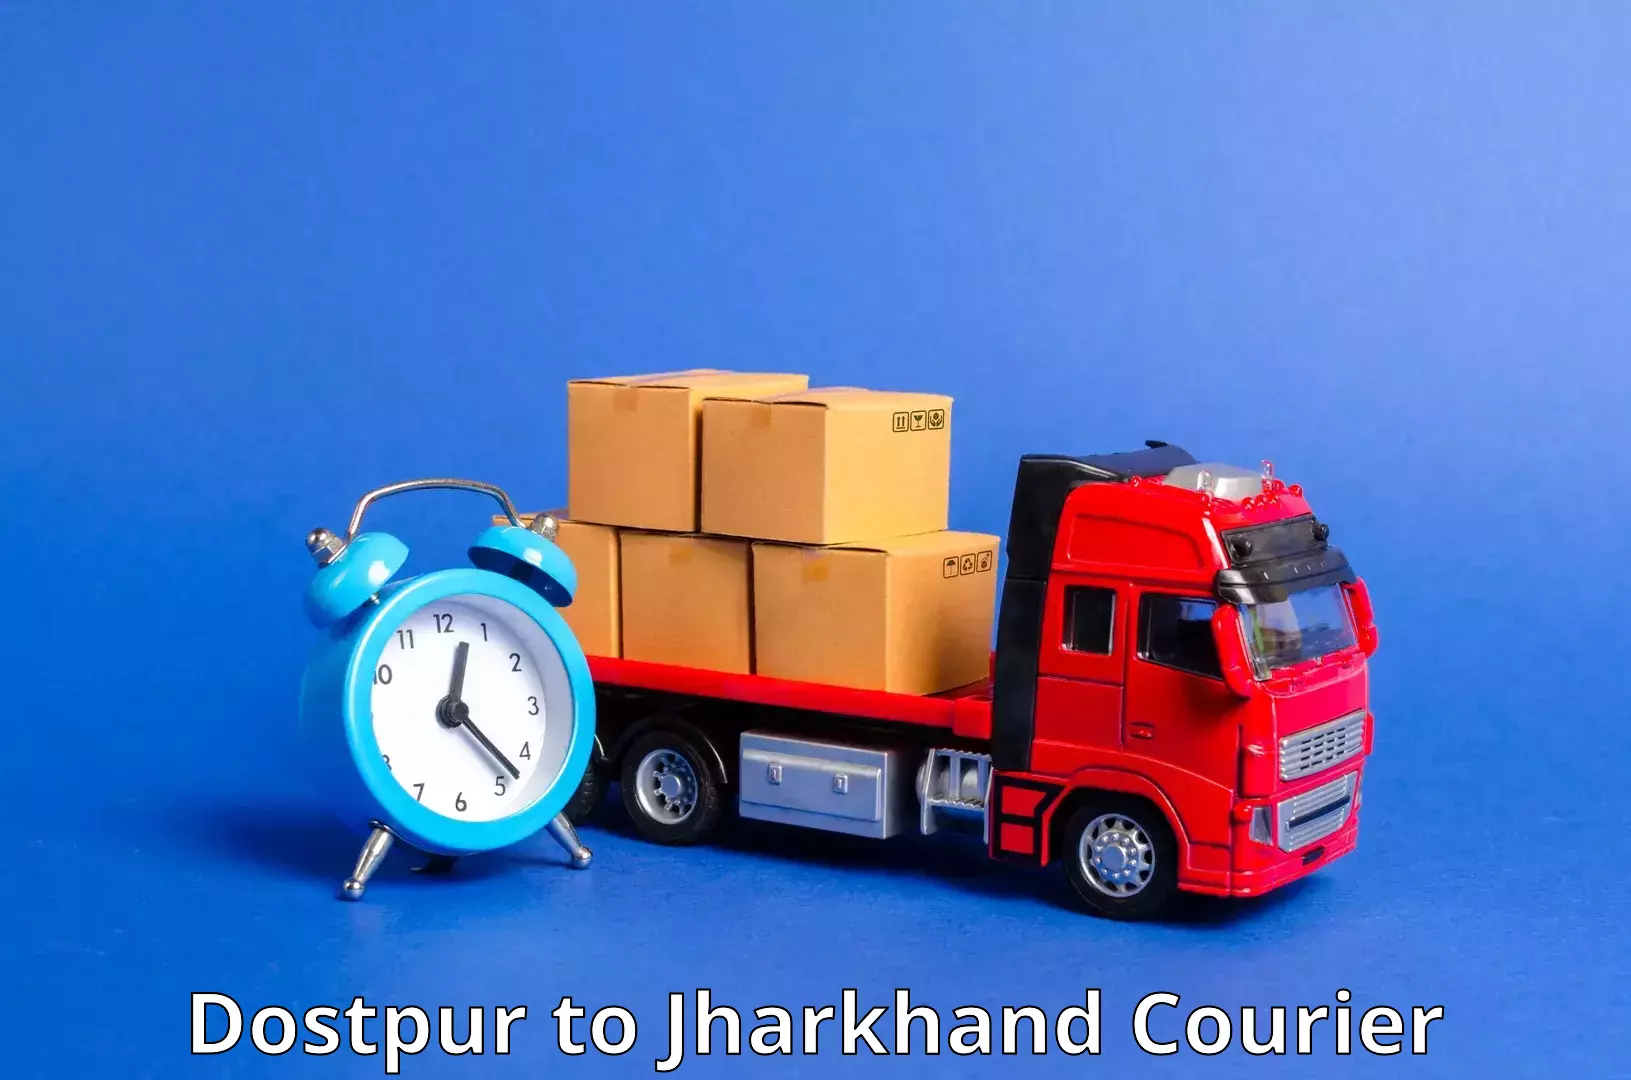 On-call courier service Dostpur to Topchanchi